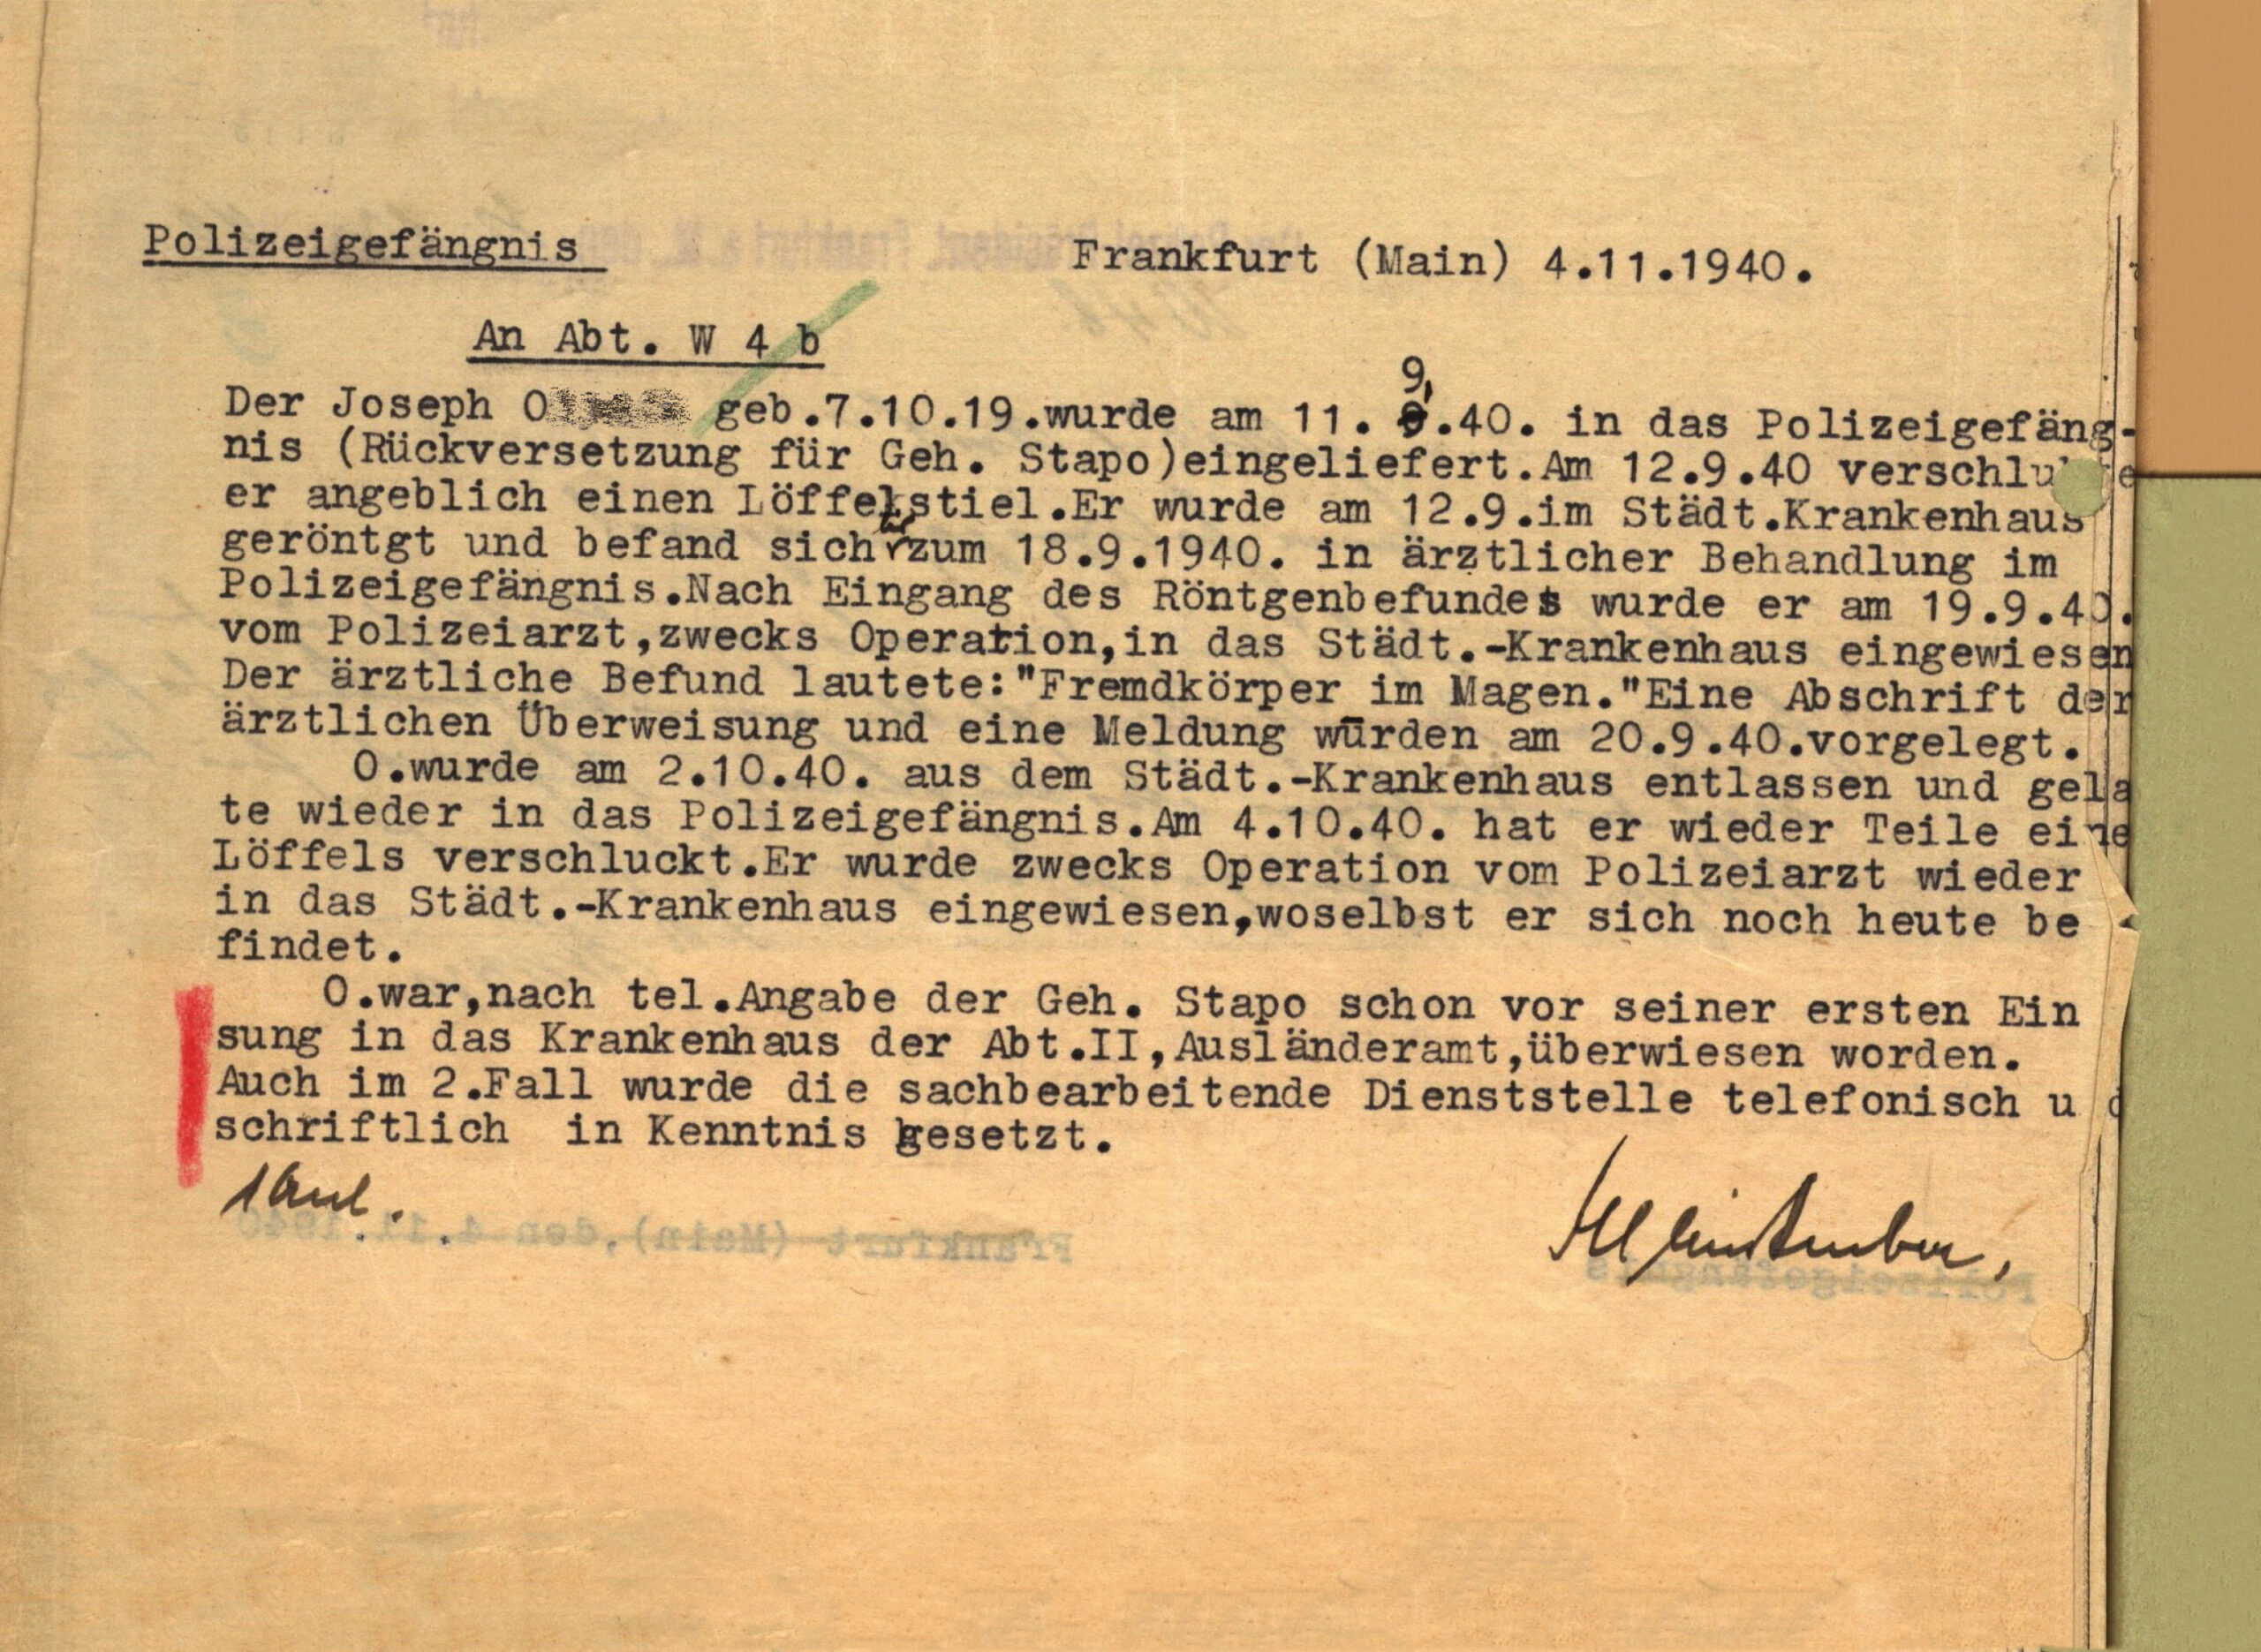 Letter concerning the Polish prisoner Joseph O. of 4.11.1940, who is said to have swallowed a spoon handle on 12.9.1940